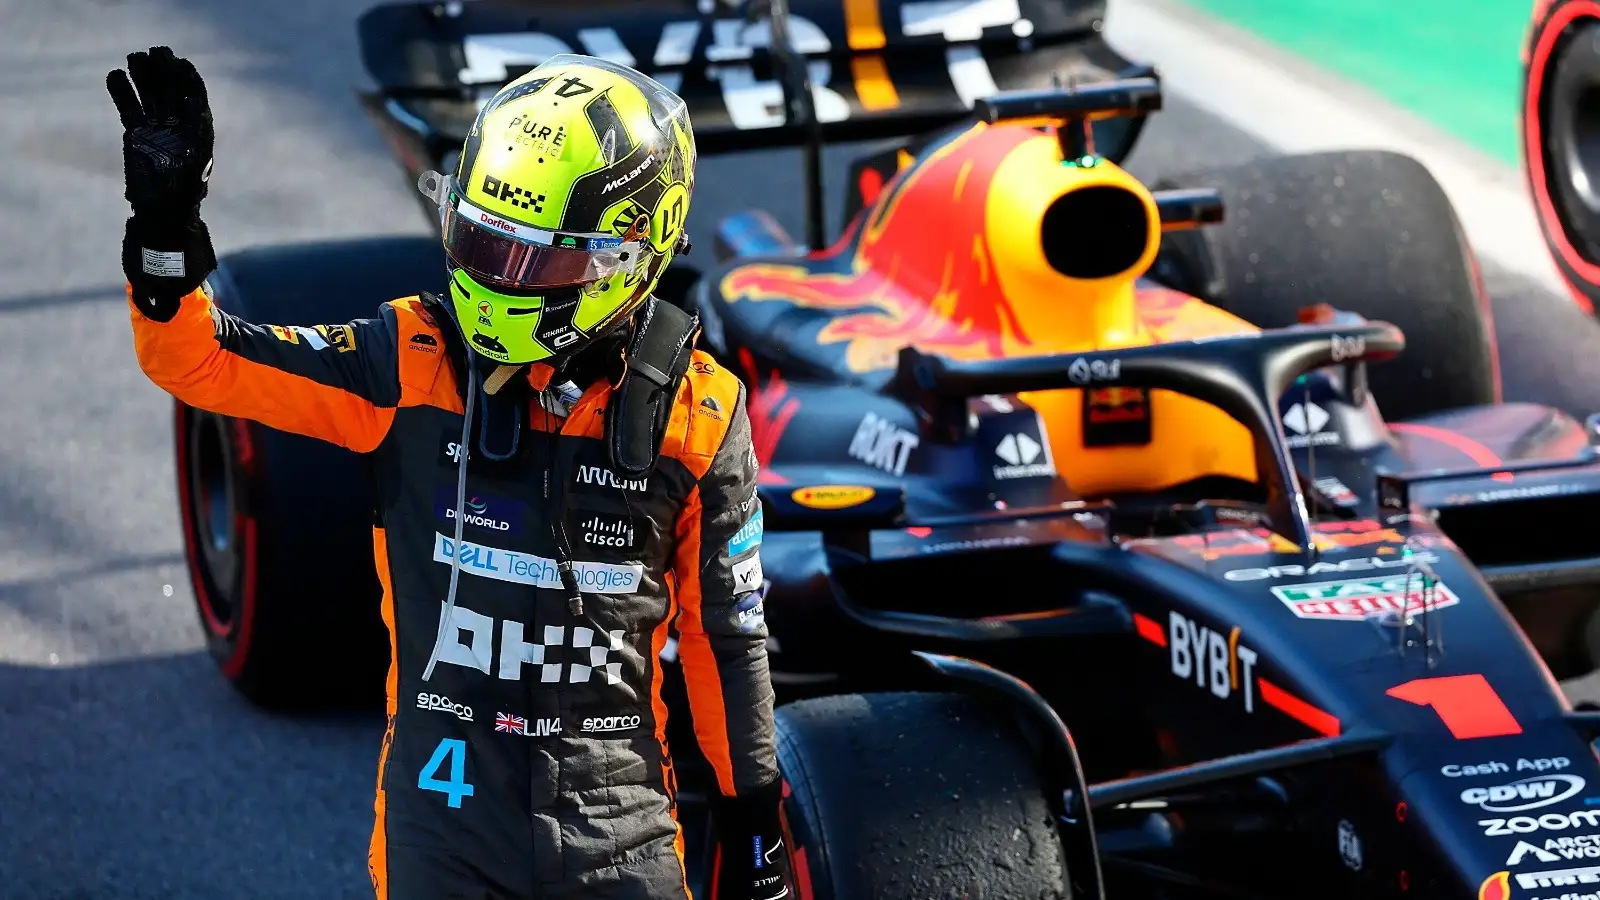 Lando Norris waves in front of the Red Bull.